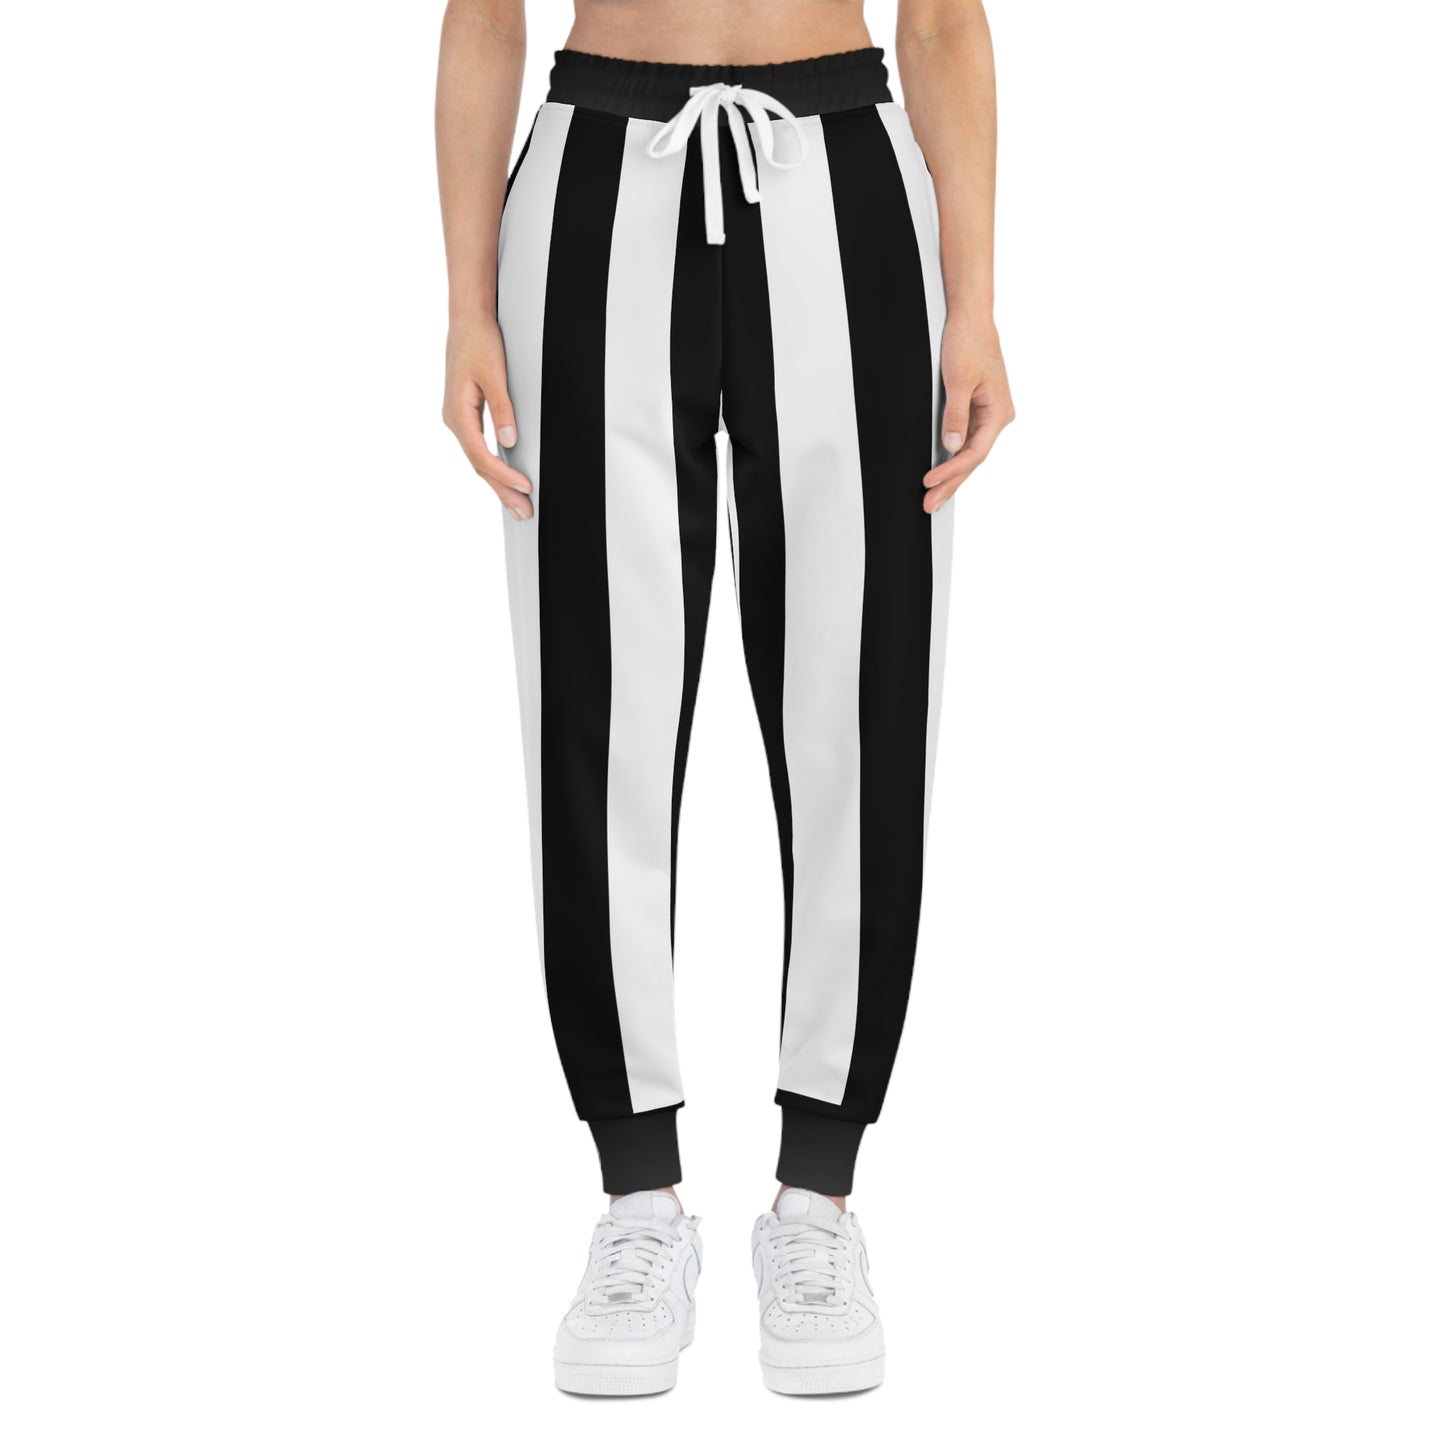 Athletic Joggers For Women | Black & White